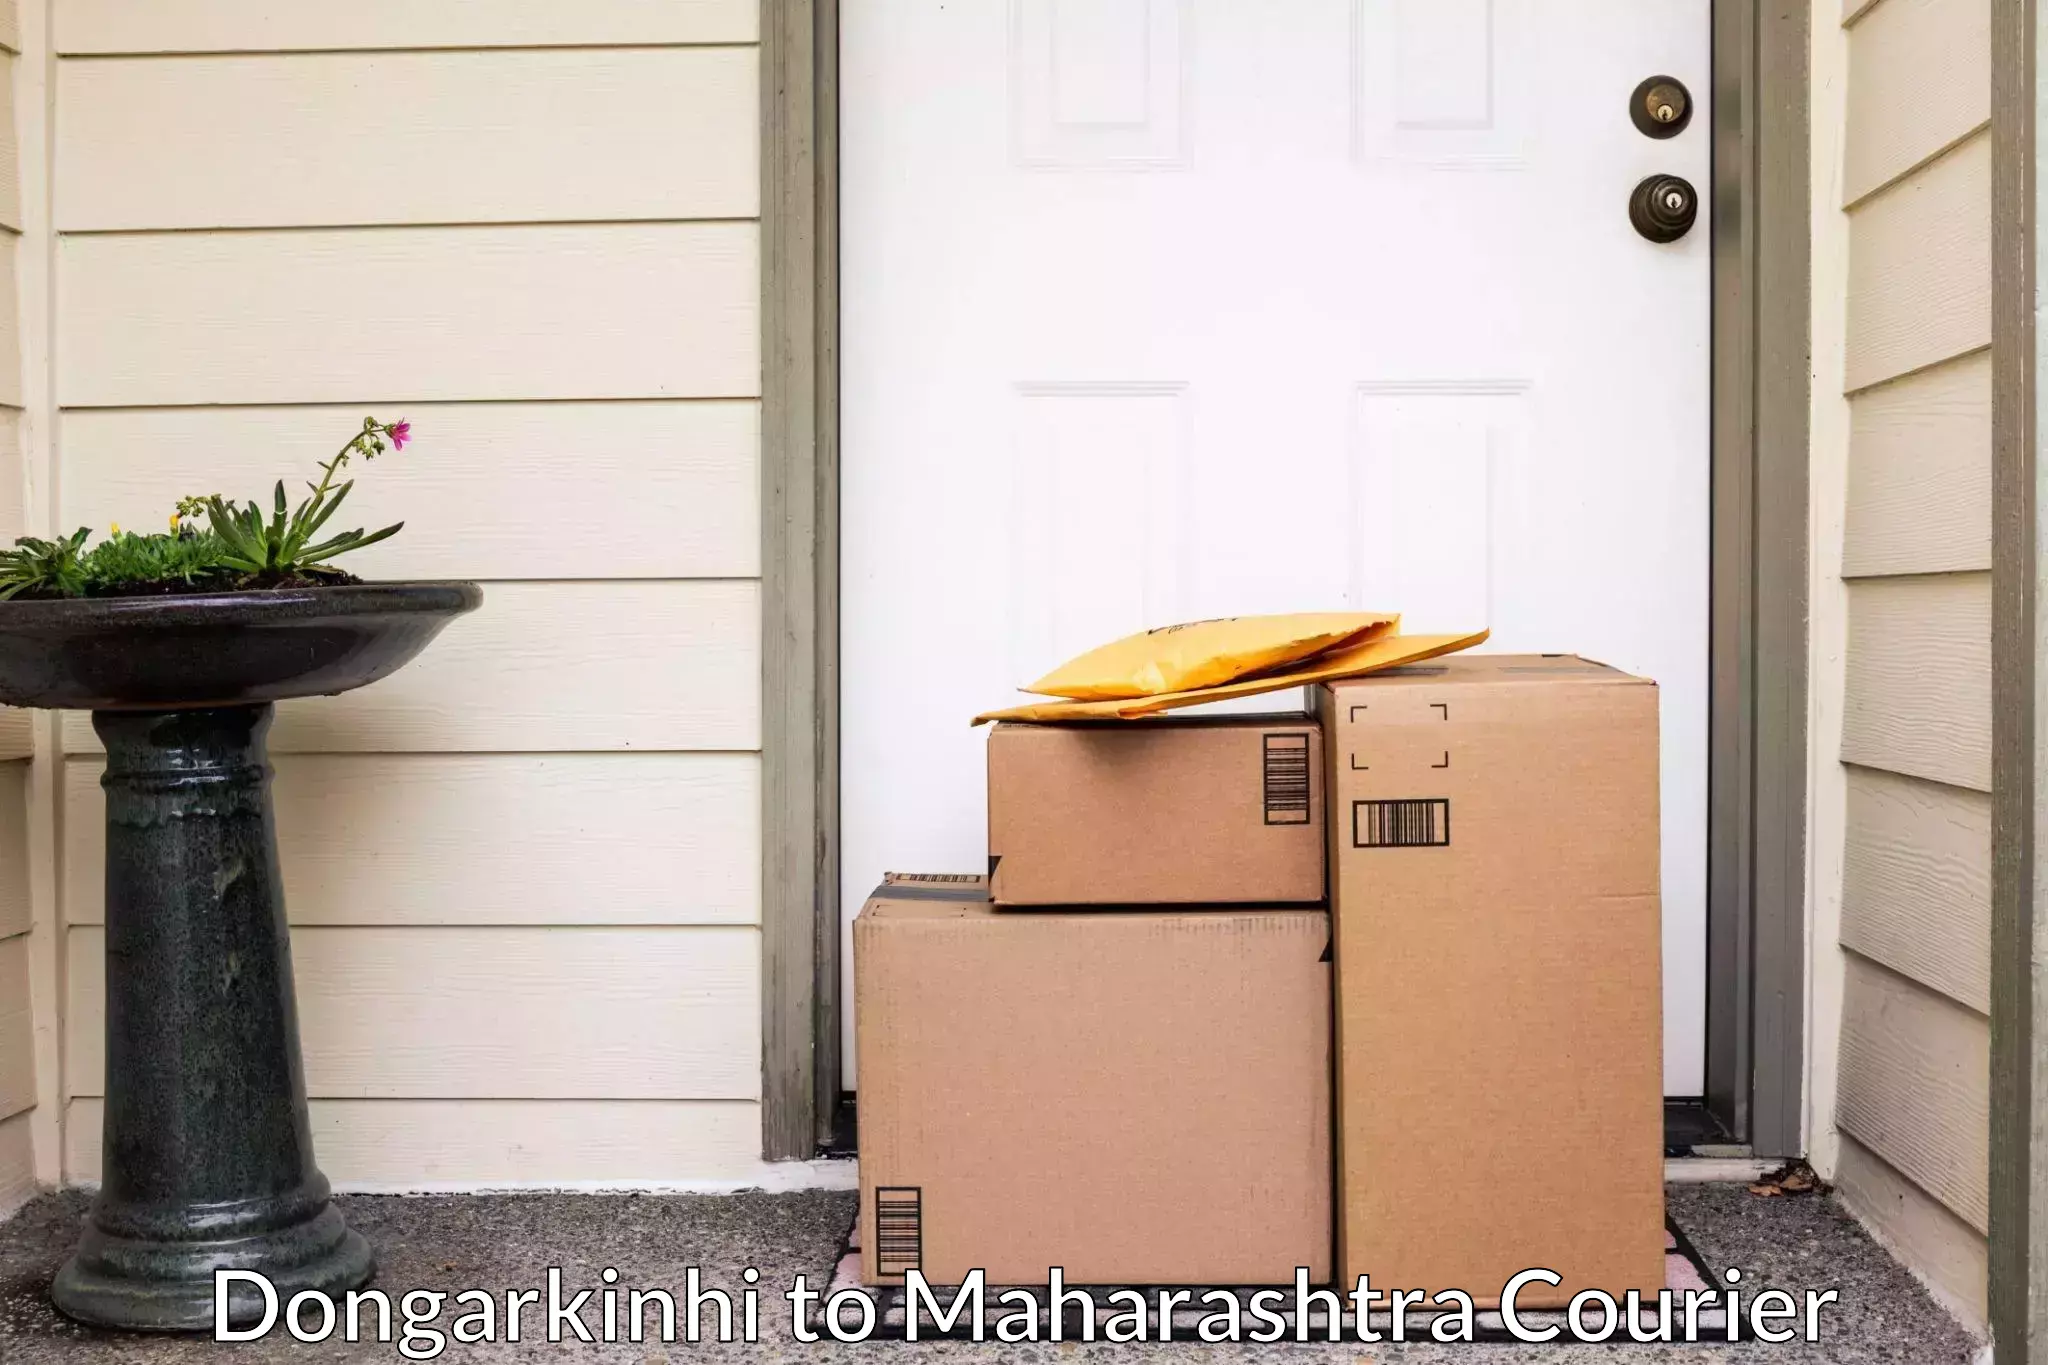 Long-distance moving services Dongarkinhi to Kolhapur